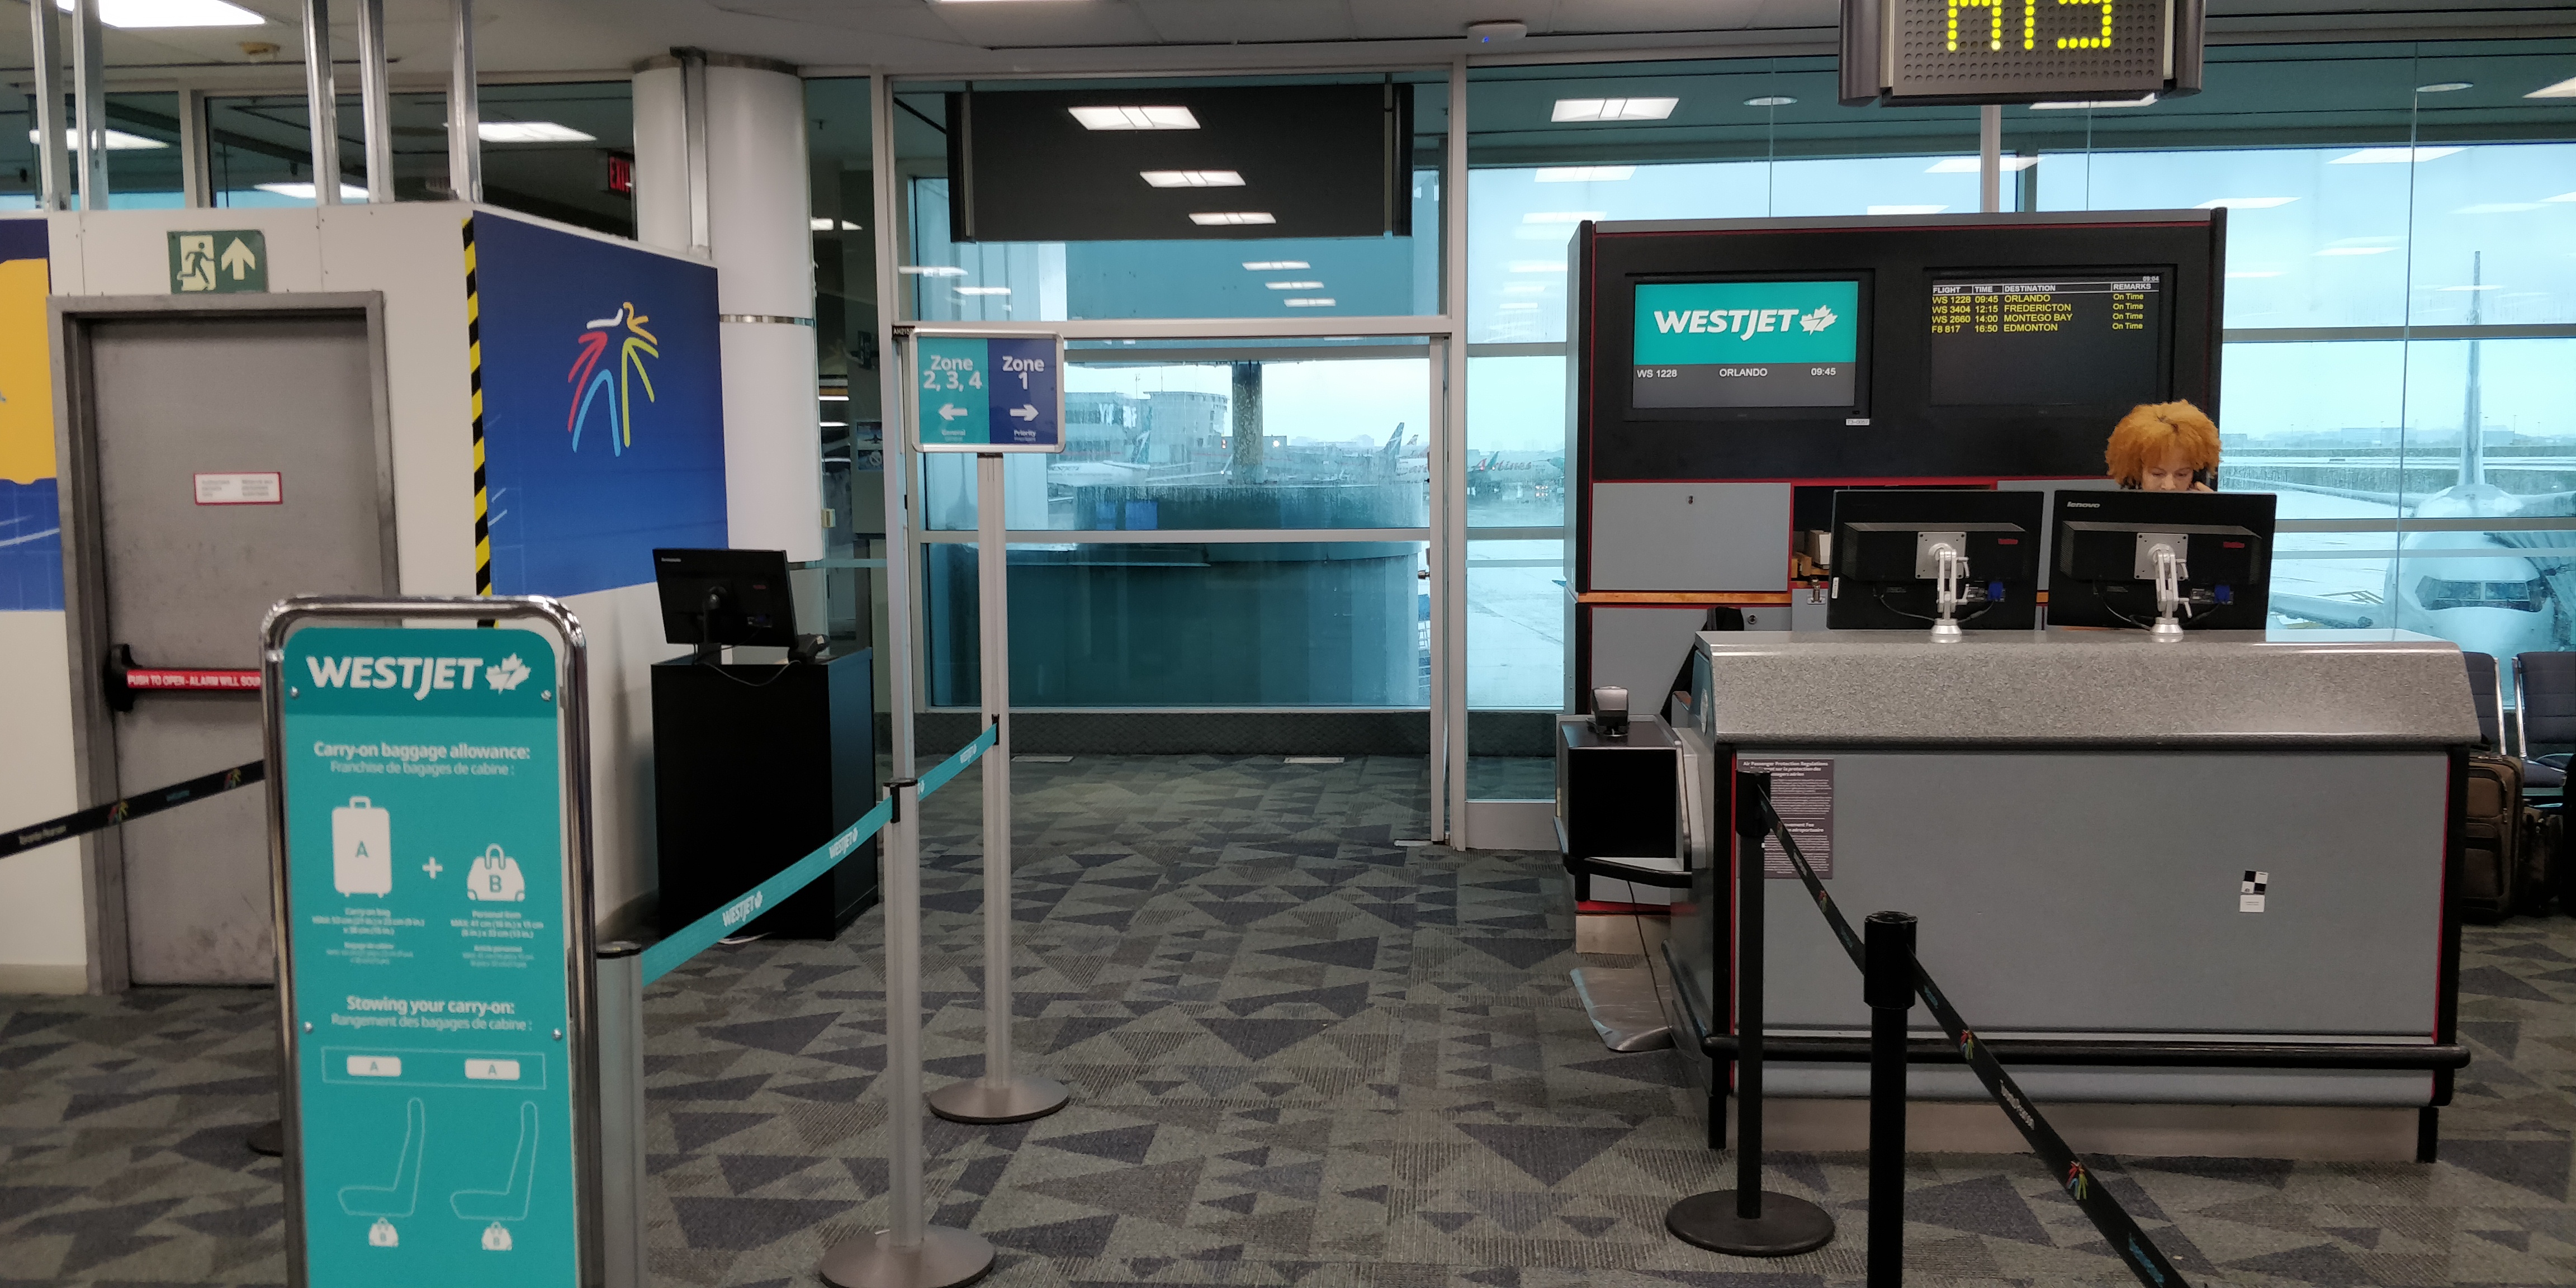 A PICTURE OF THE WESTJET BOARDING AREA WITH PRIORITY BOARDING